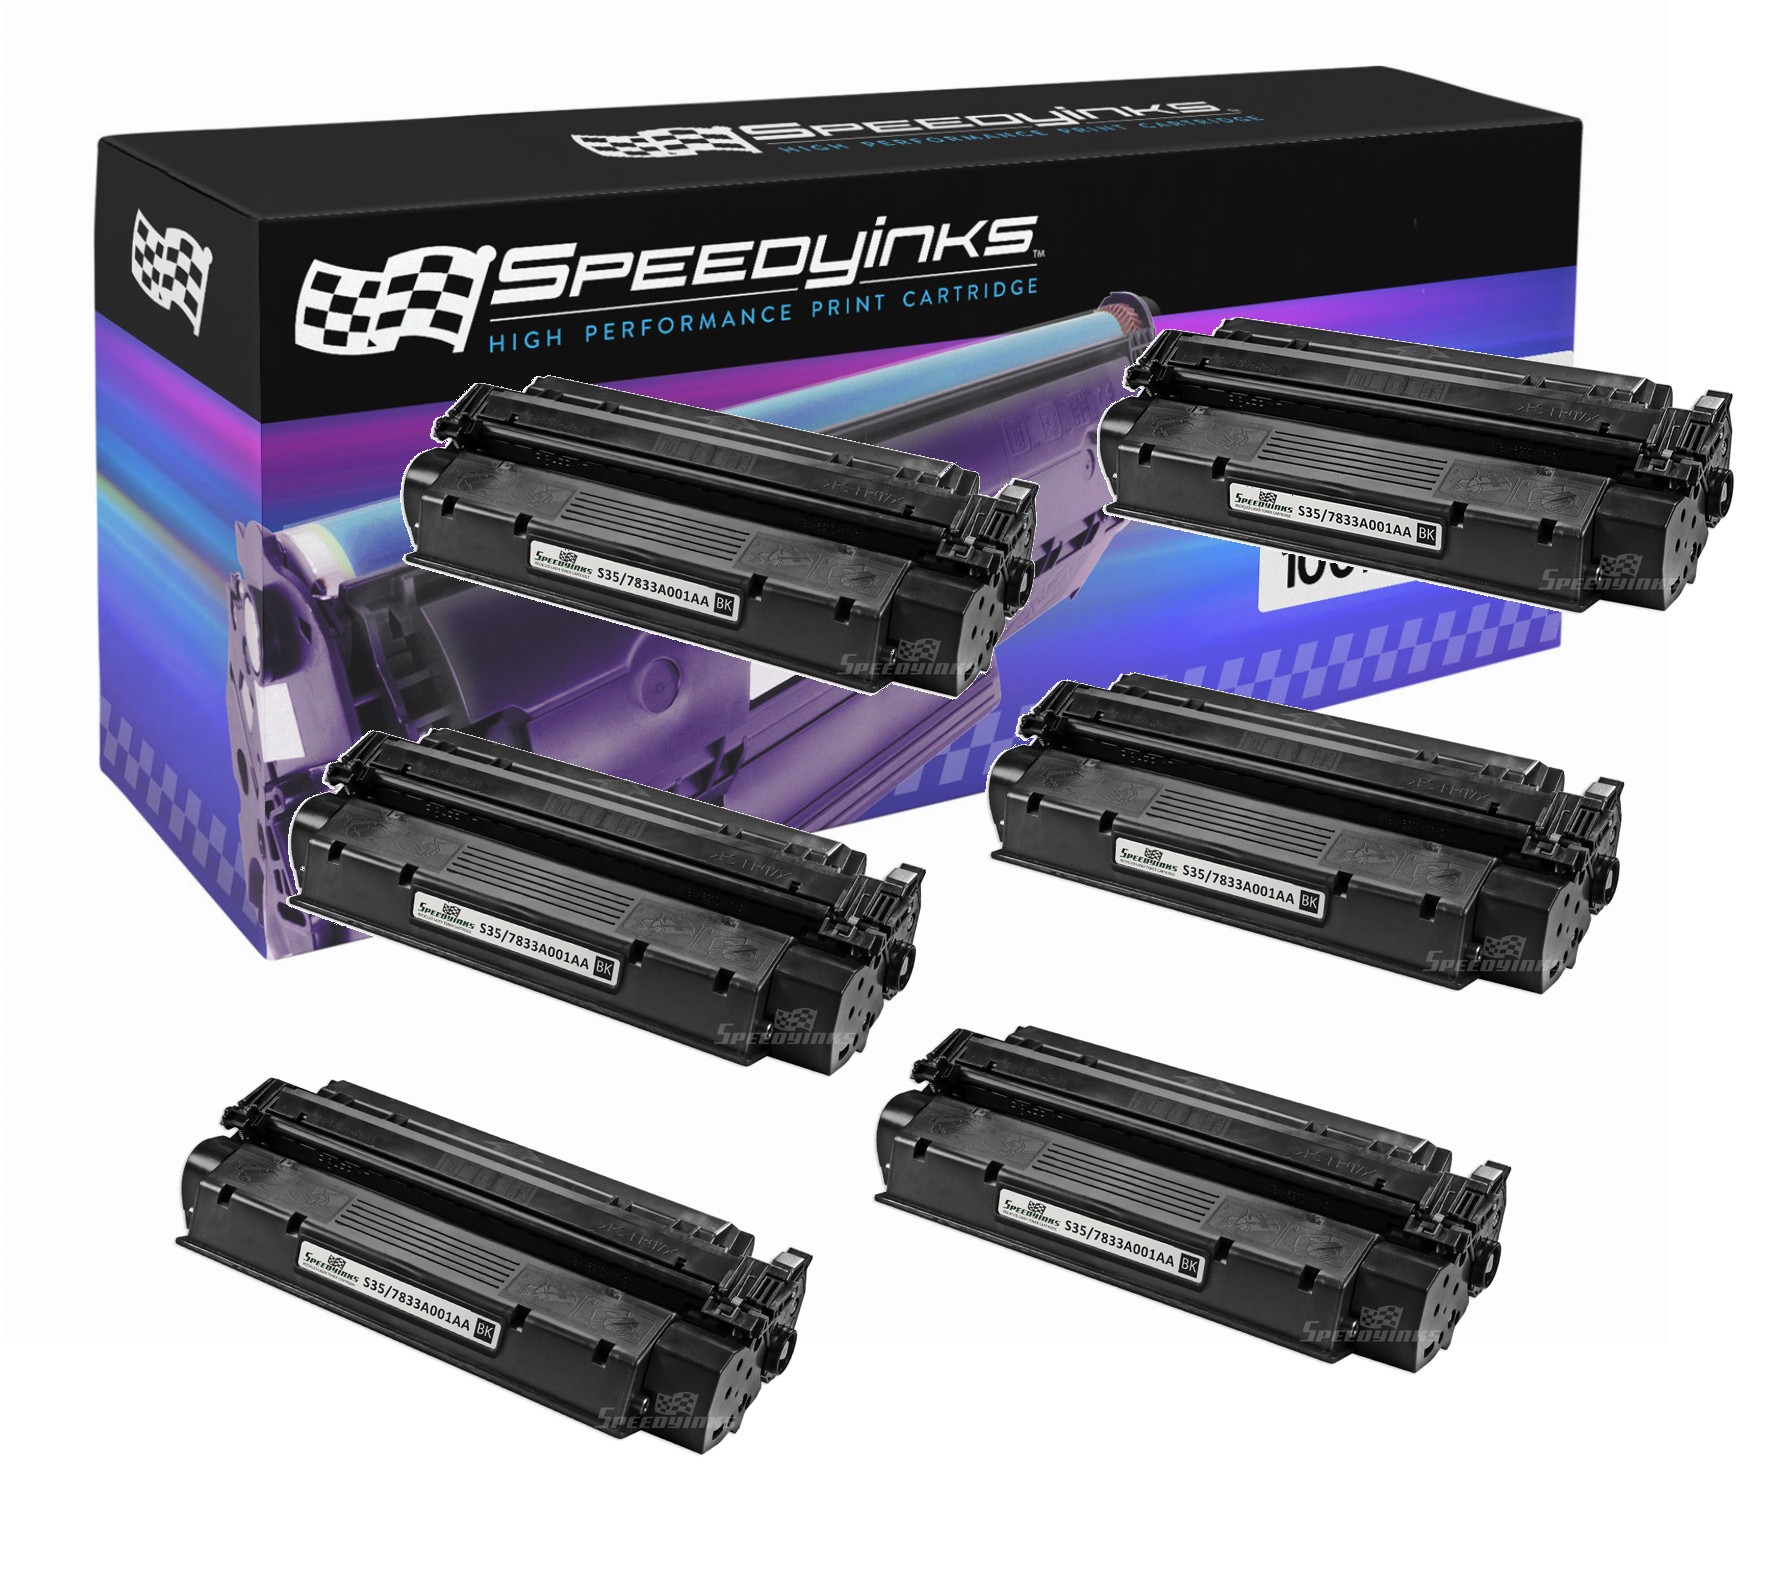 Speedy Remanufactured Toner Cartridge Replacement for Canon S35 (Black, 6-Pack) - image 1 of 1